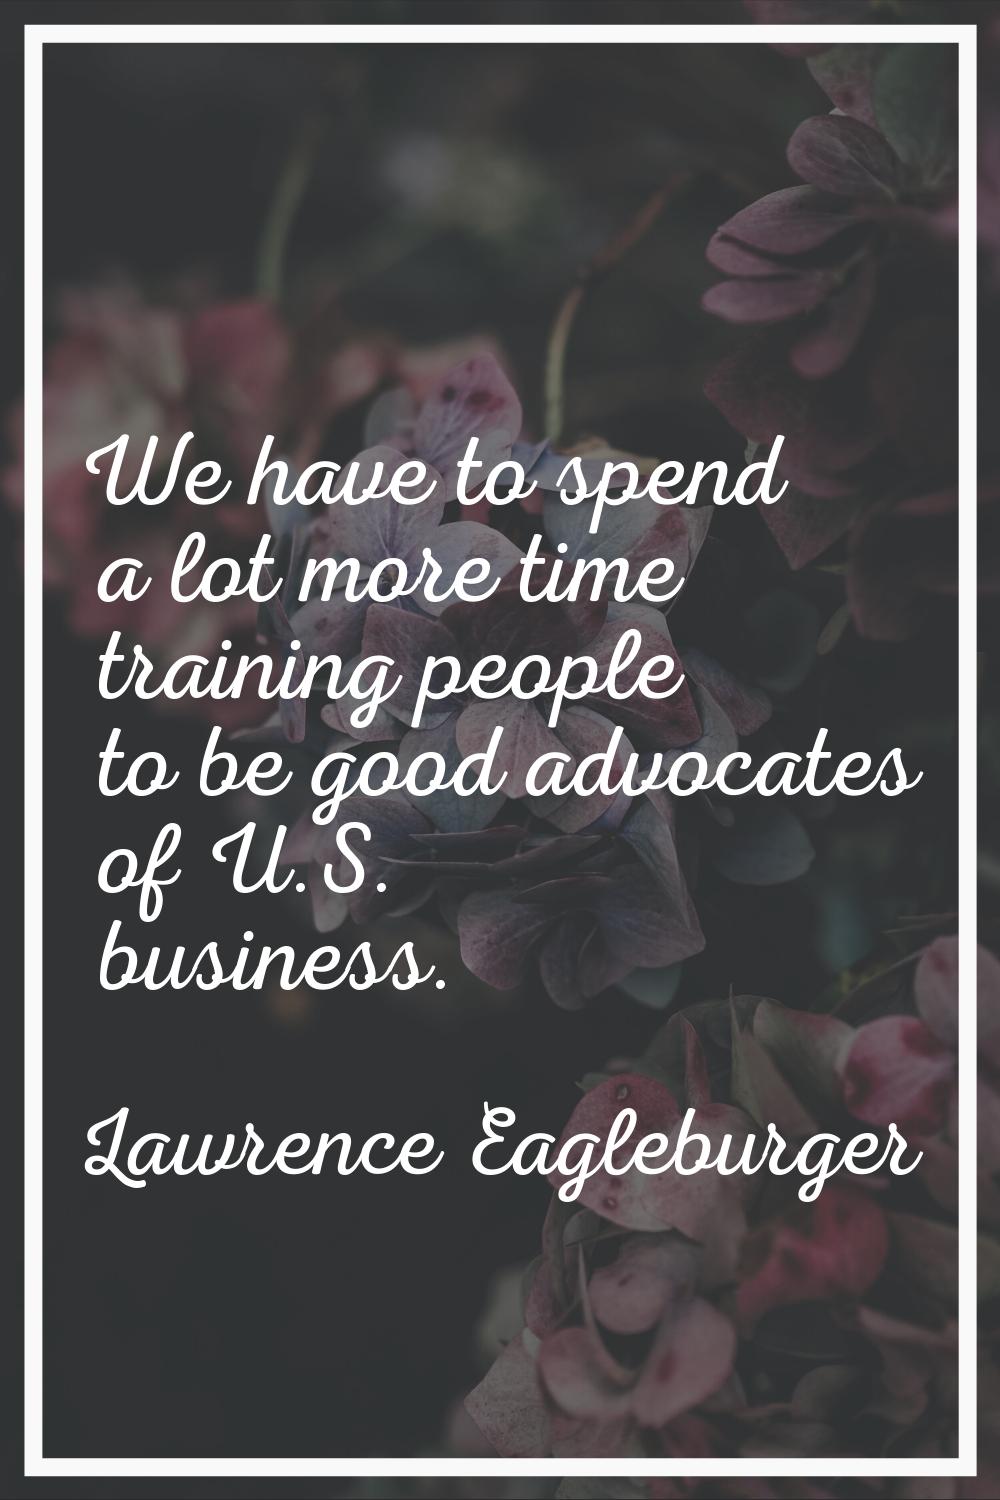 We have to spend a lot more time training people to be good advocates of U.S. business.